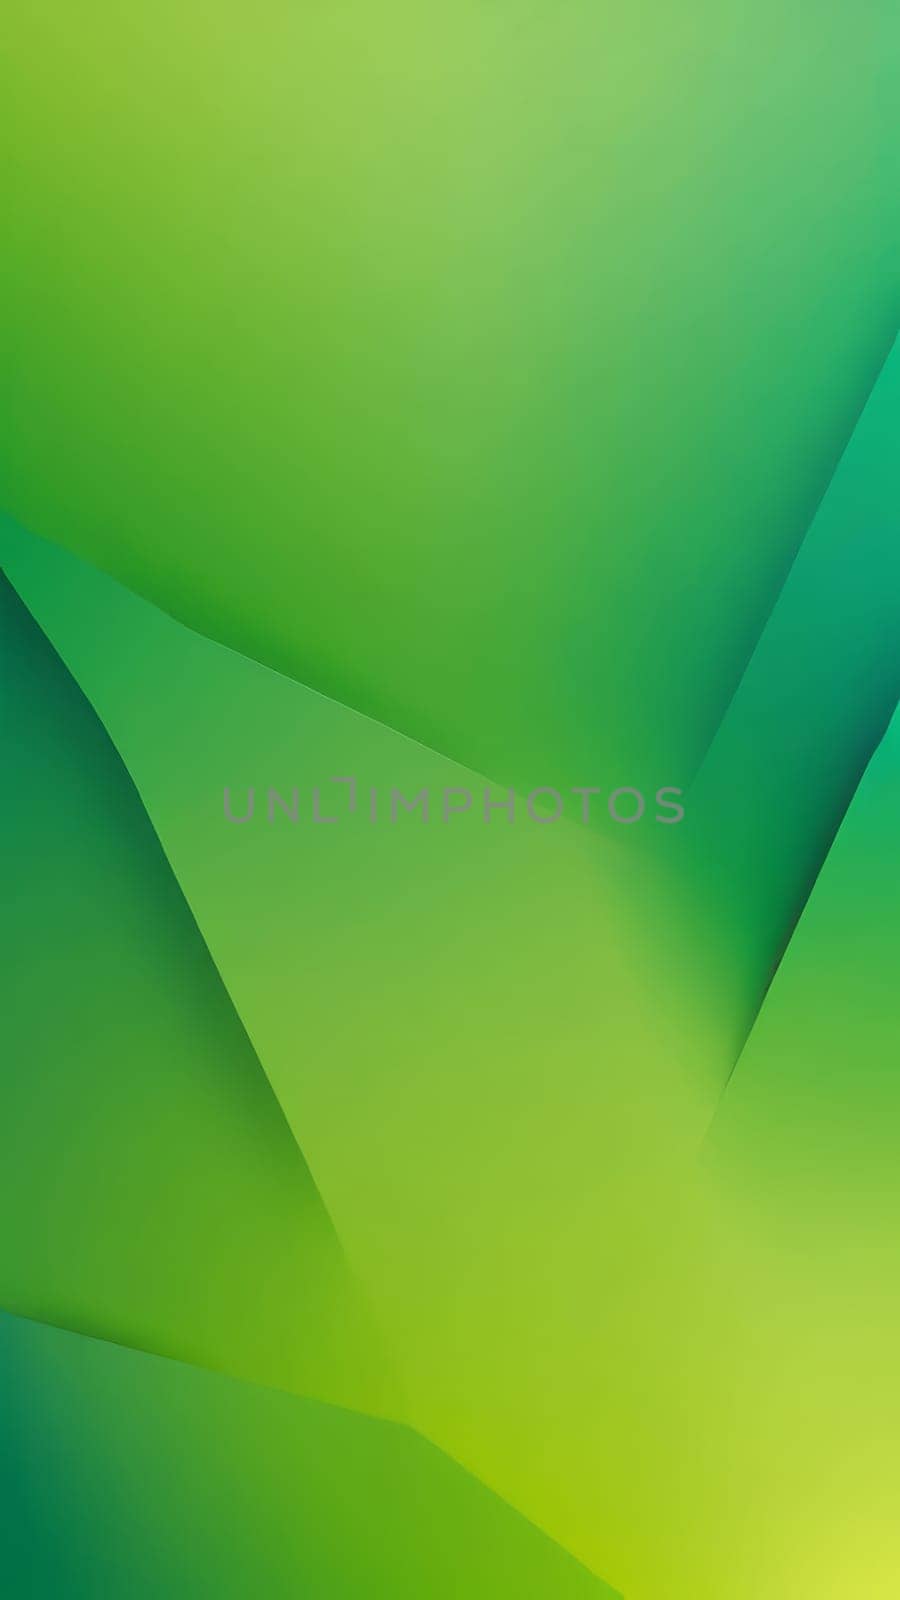 Background from Trapezoidal shapes and green by nkotlyar